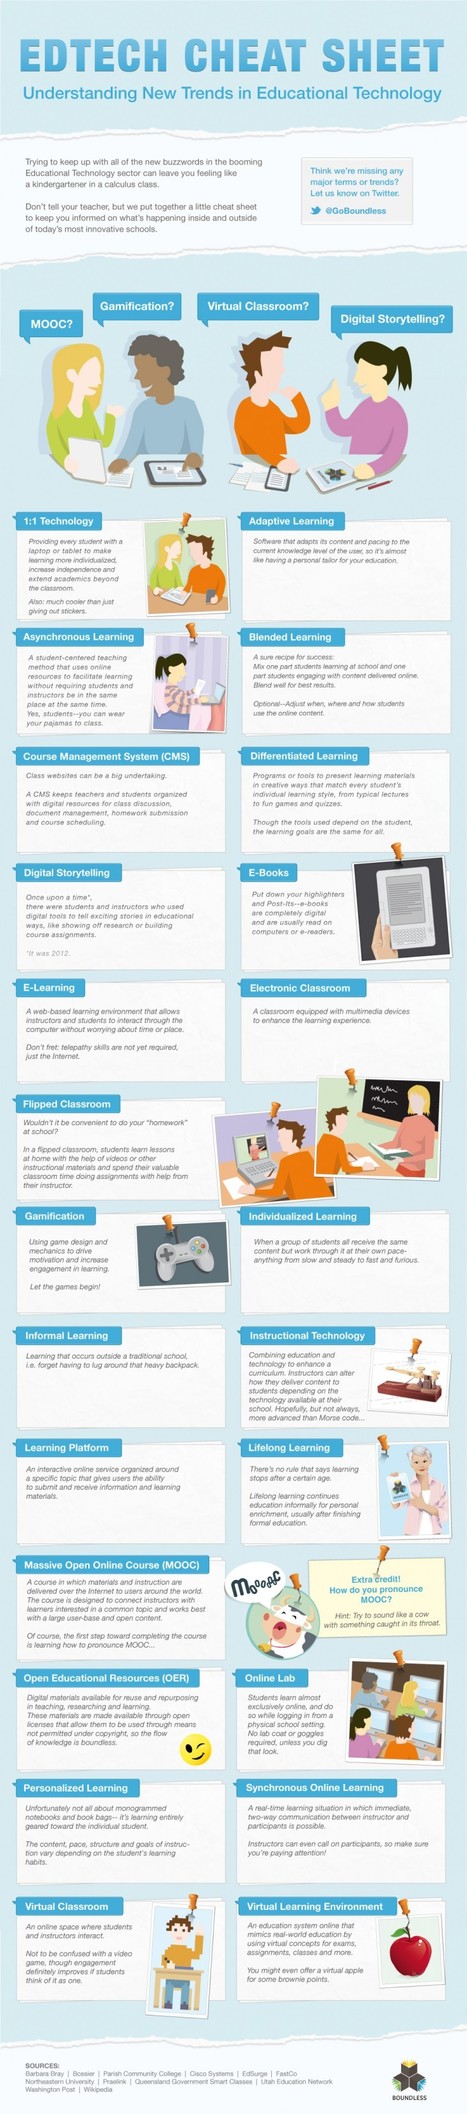 The Must-Have EdTech Cheat Sheet [Infographic] | Digital Learning - beyond eLearning and Blended Learning | Scoop.it